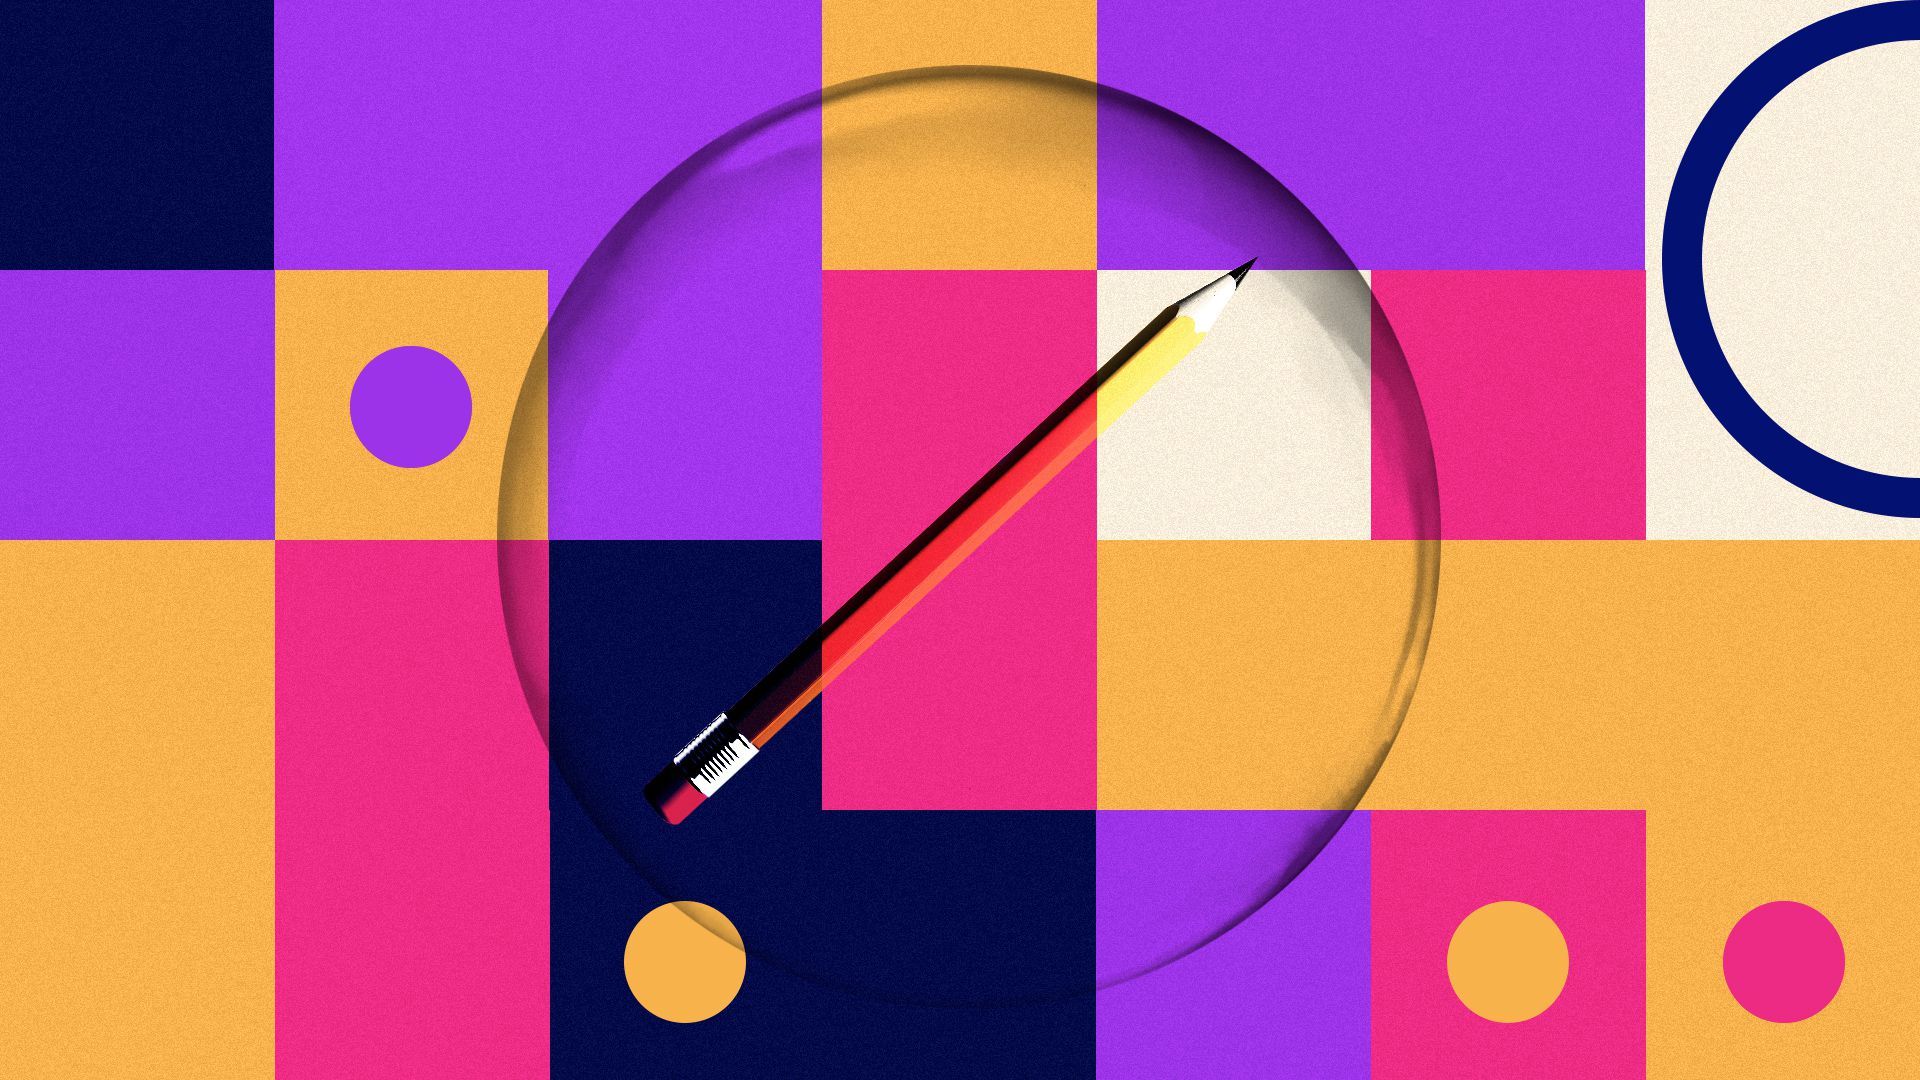 Illustration of pencil in a bubble with a grid background and circles